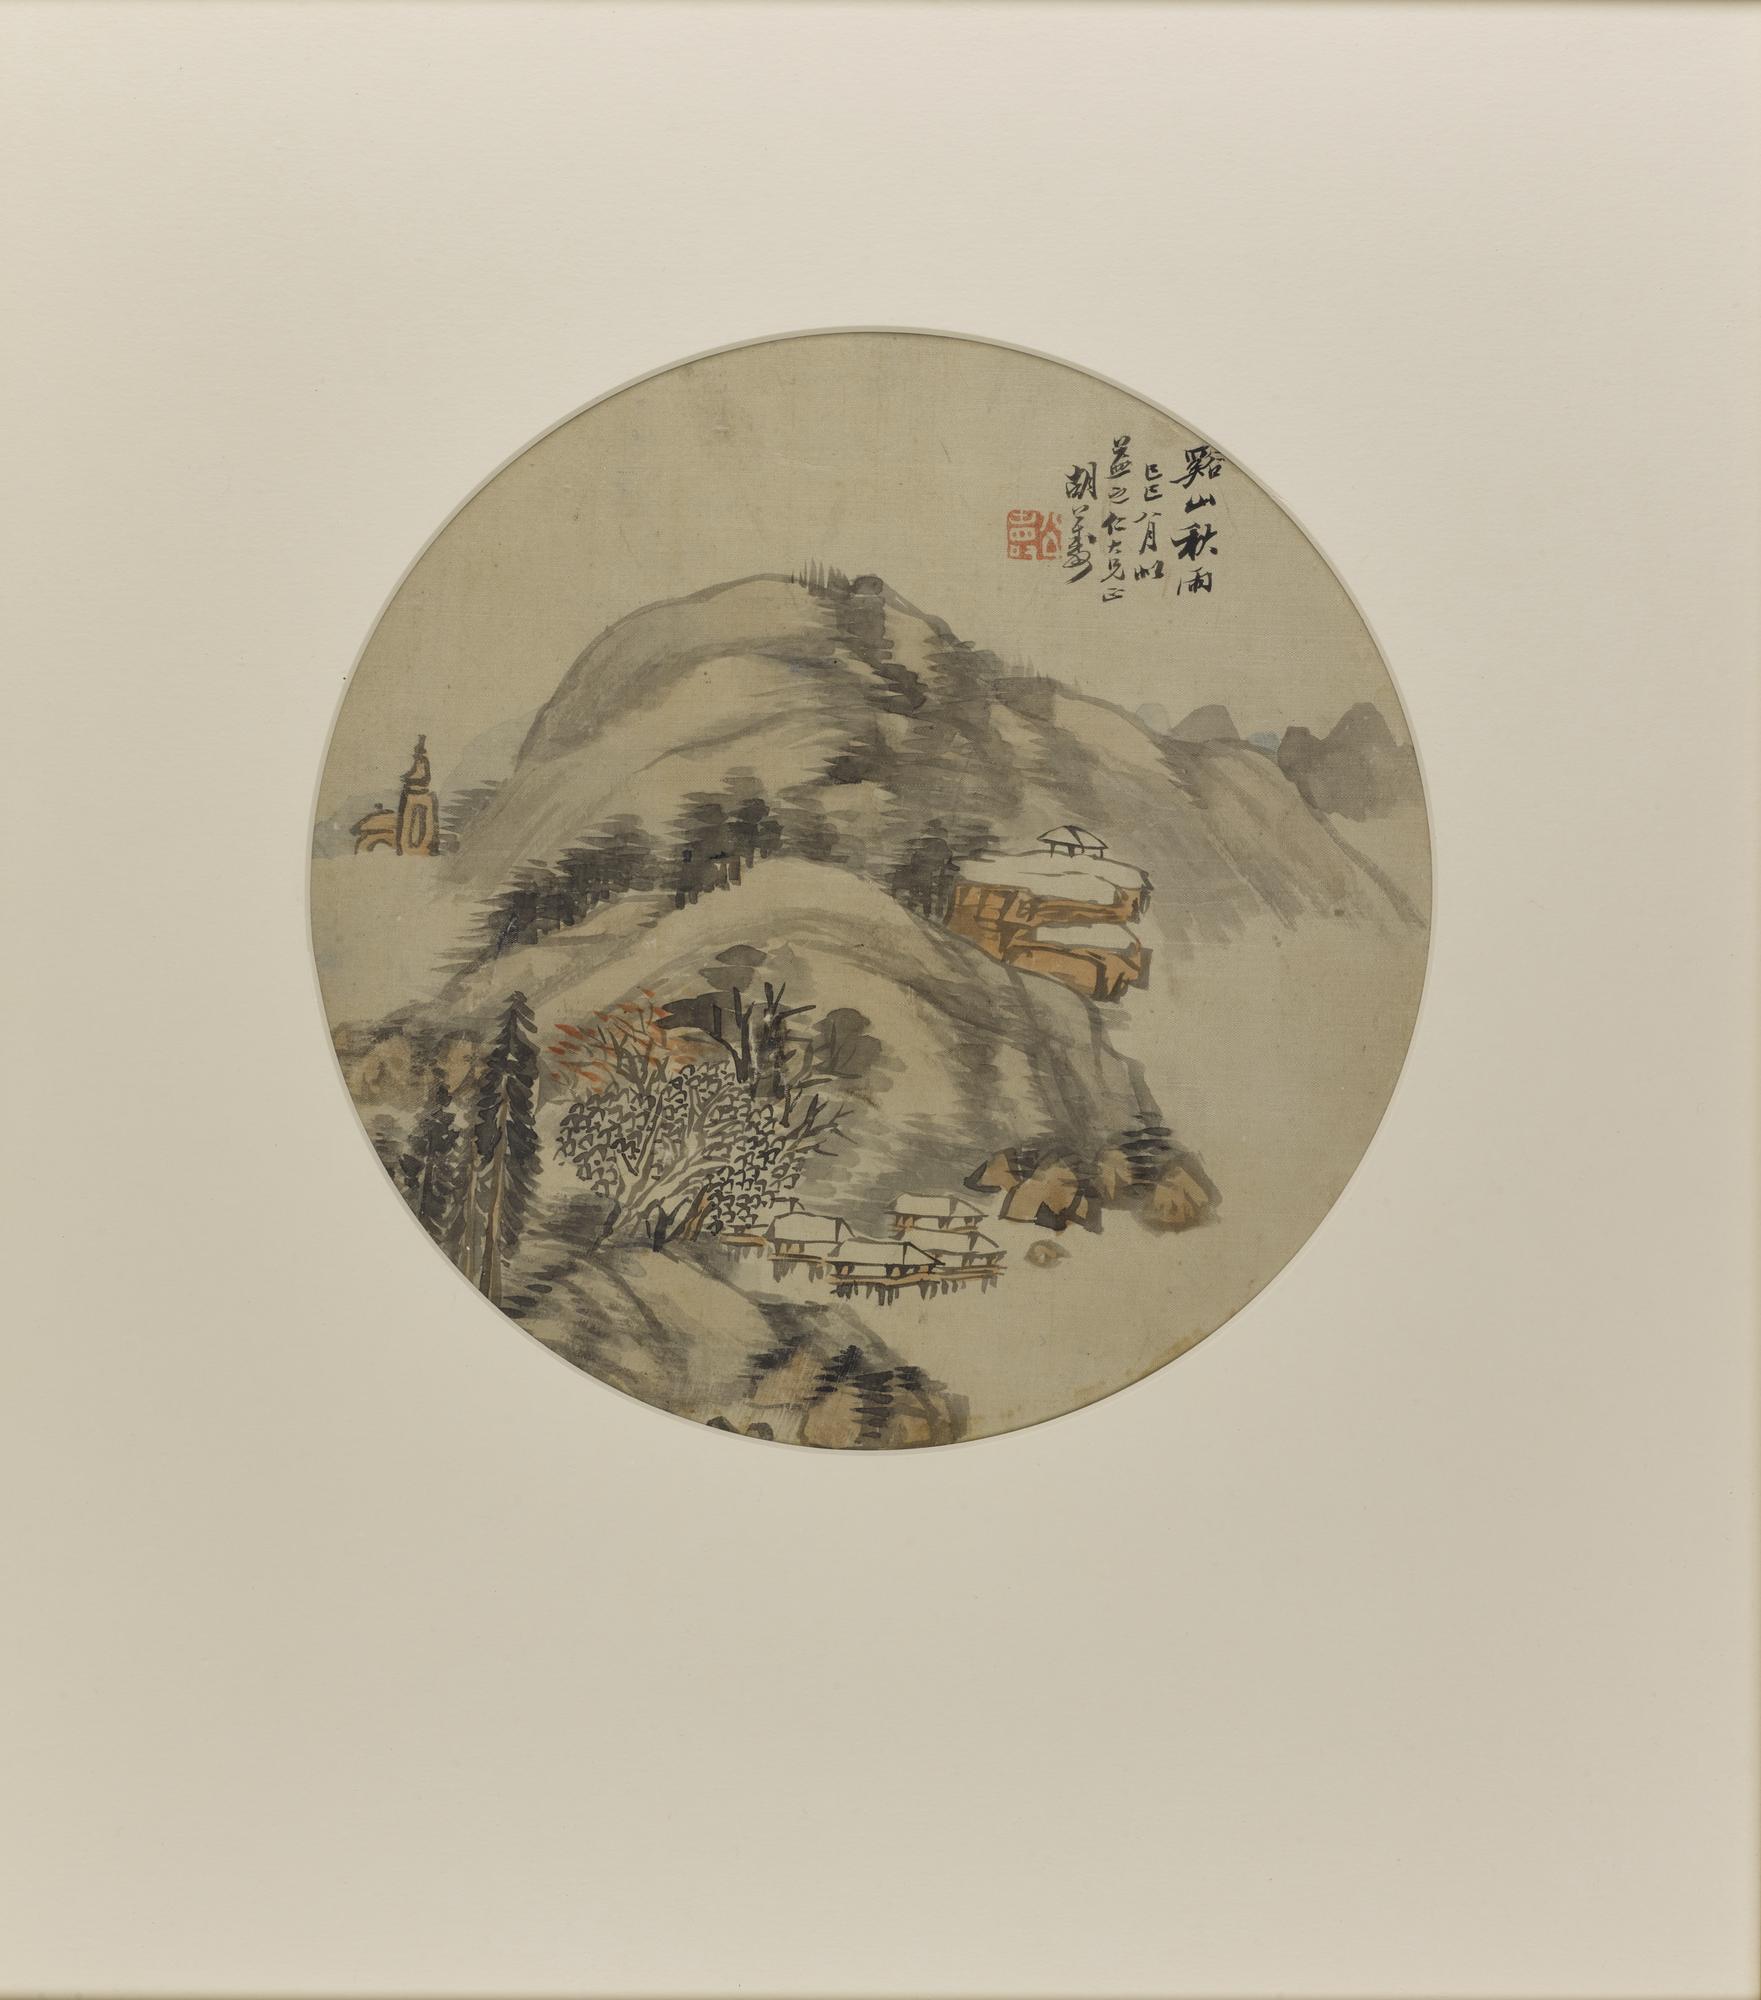 Circular fan painting entitled Mountain Streams and Autumn Rain, in ink and colour on silk, framed and glazed: China, by Hu Gongshou, 1869. Collected by Sir James Stewart Lockhart. With permission of George Watson's College.